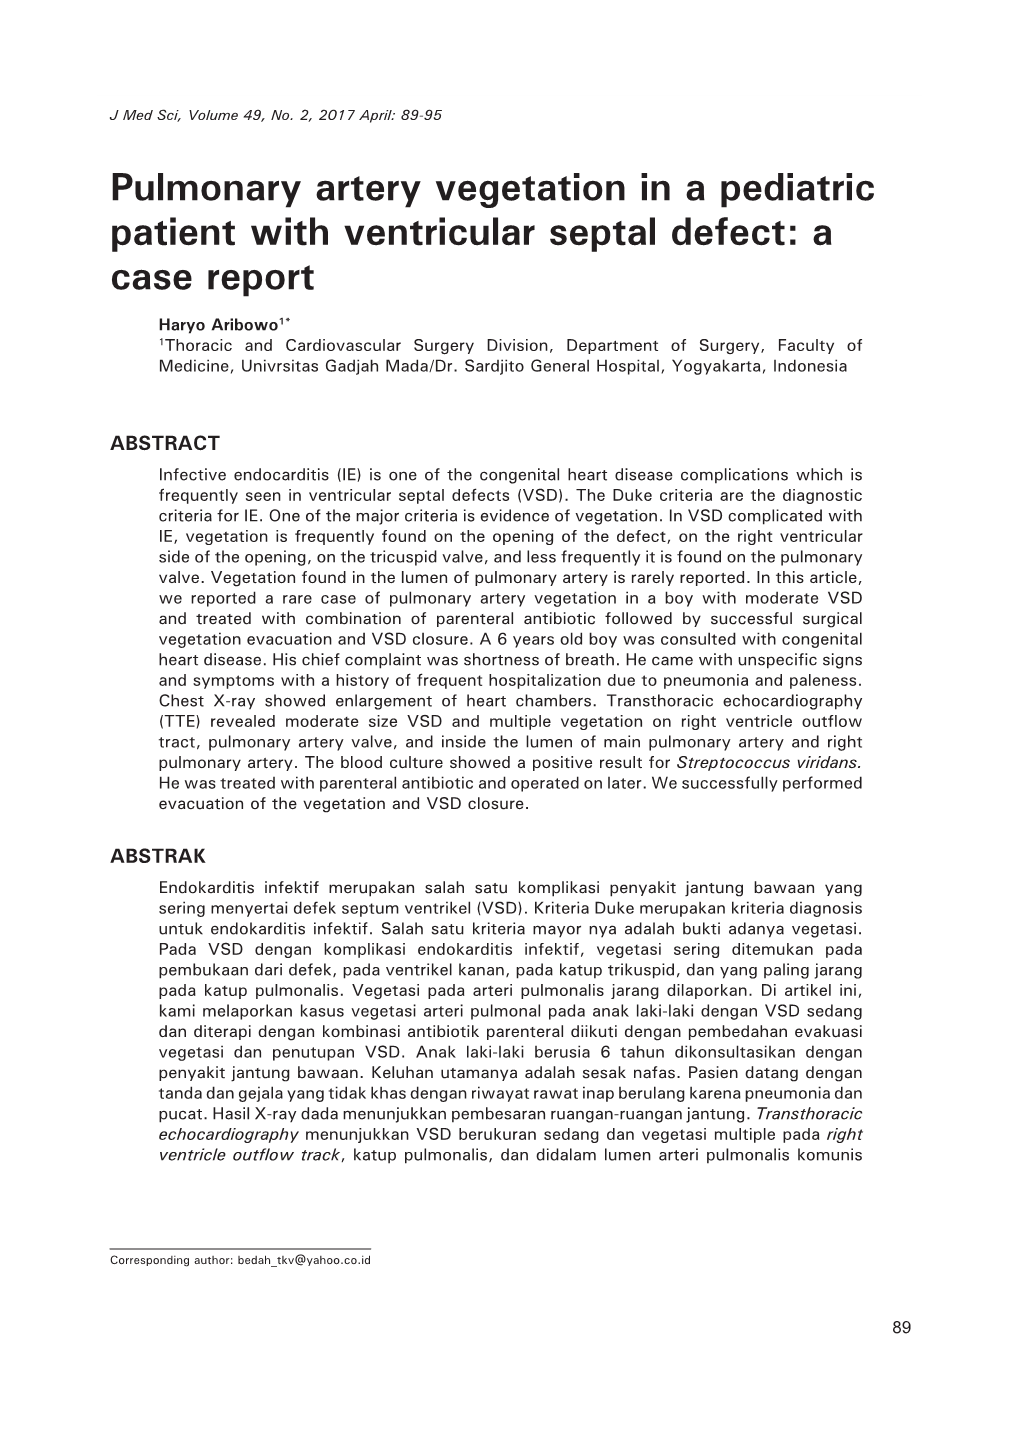 Pulmonary Artery Vegetation in a Pediatric Patient with Ventricular Septal Defect: a Case Report